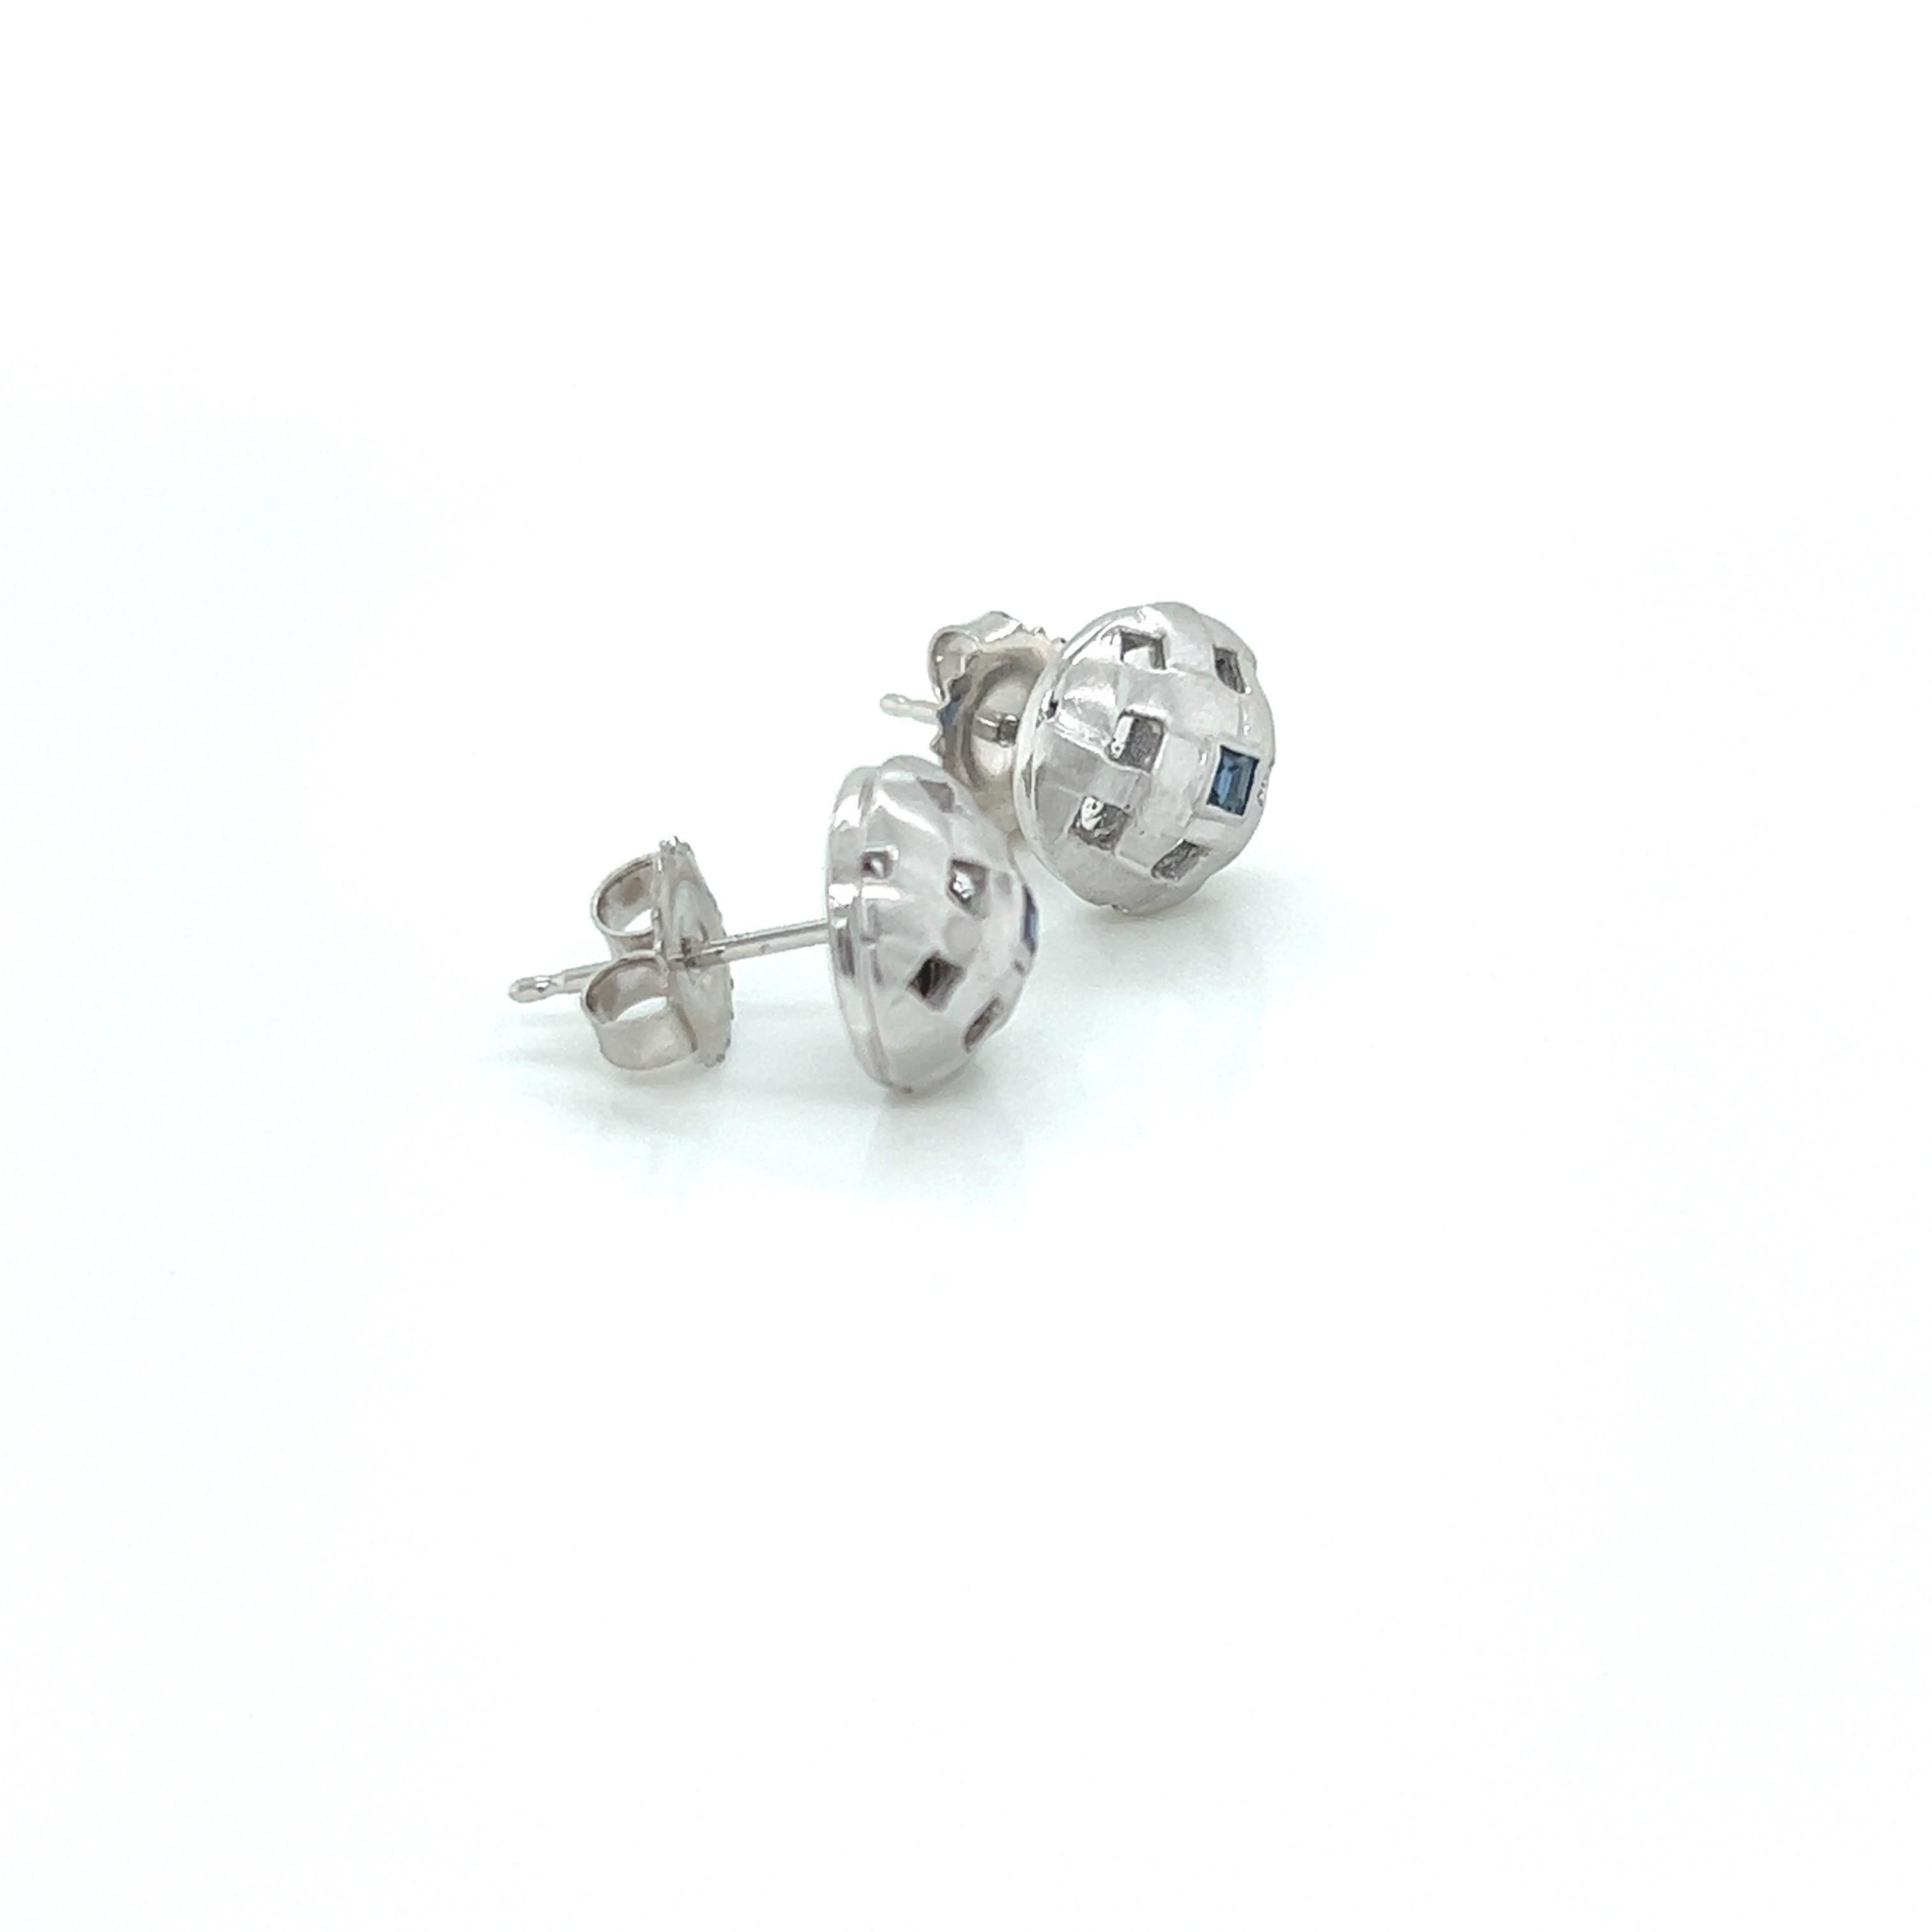 18k white gold basket weave stud earrings with a square sapphire in the center.
Comes with 18k gold earring back.

Approximate measurement 9.8mm in diameter.